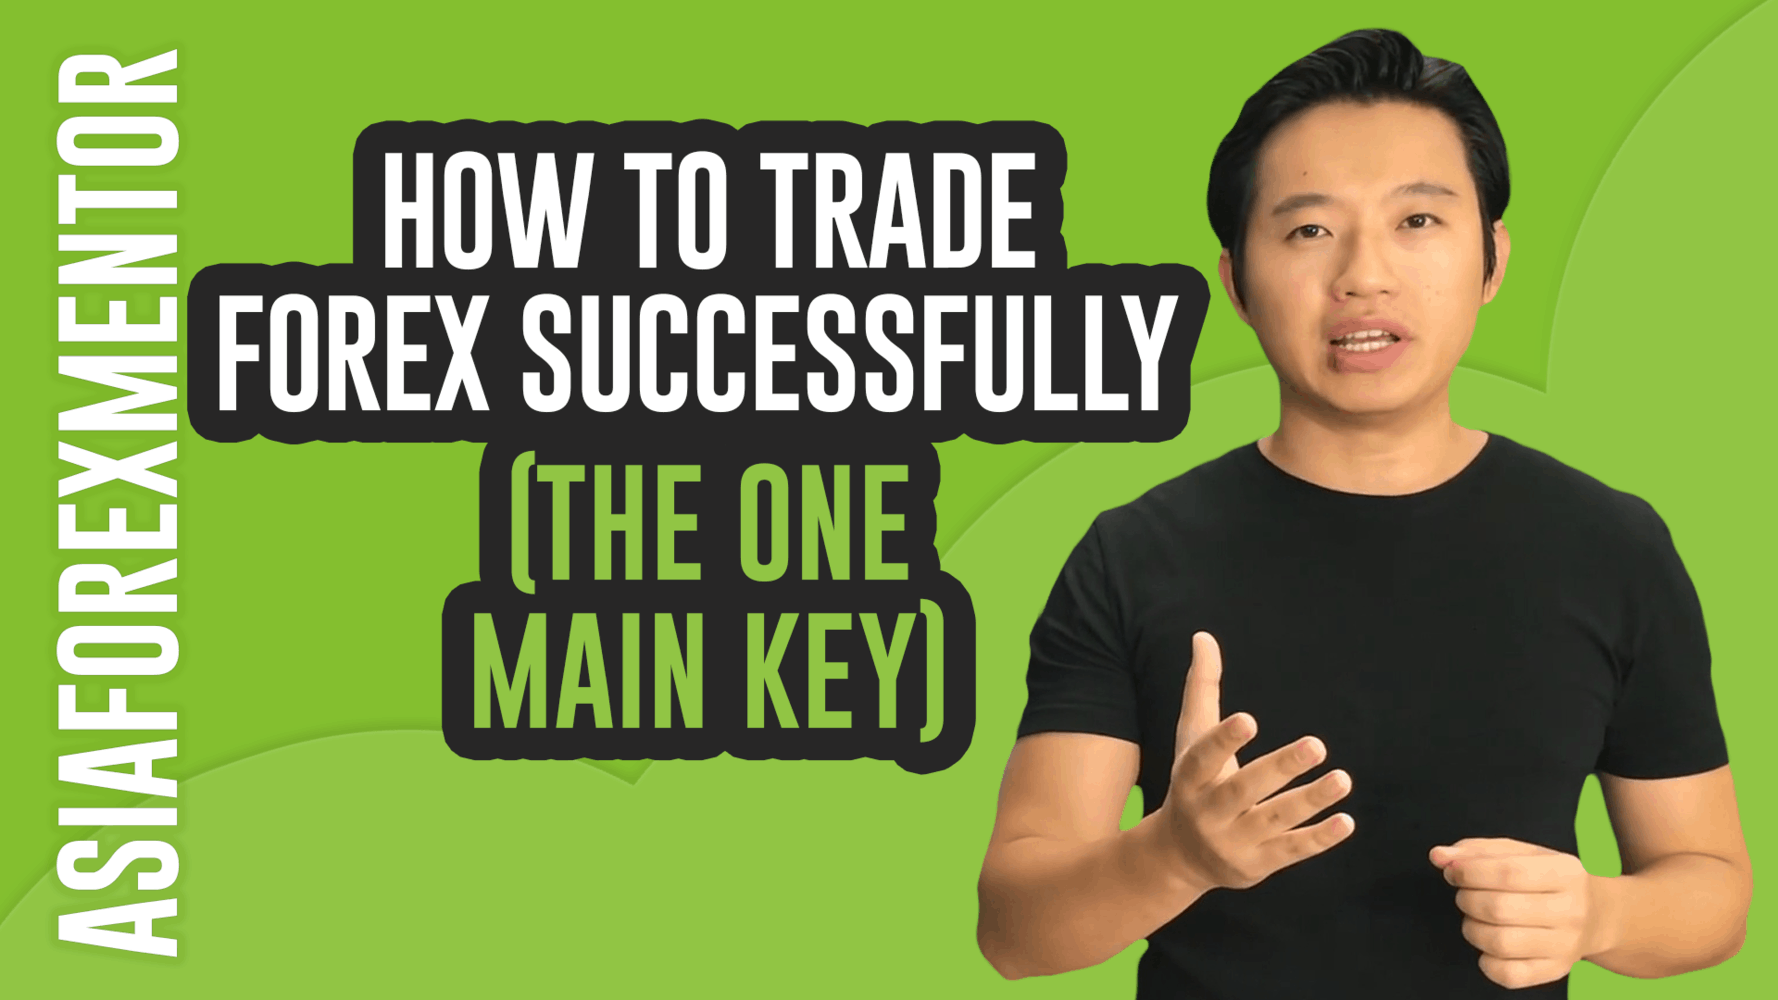 How to Trade Forex Successfully (The 1 Main Key)